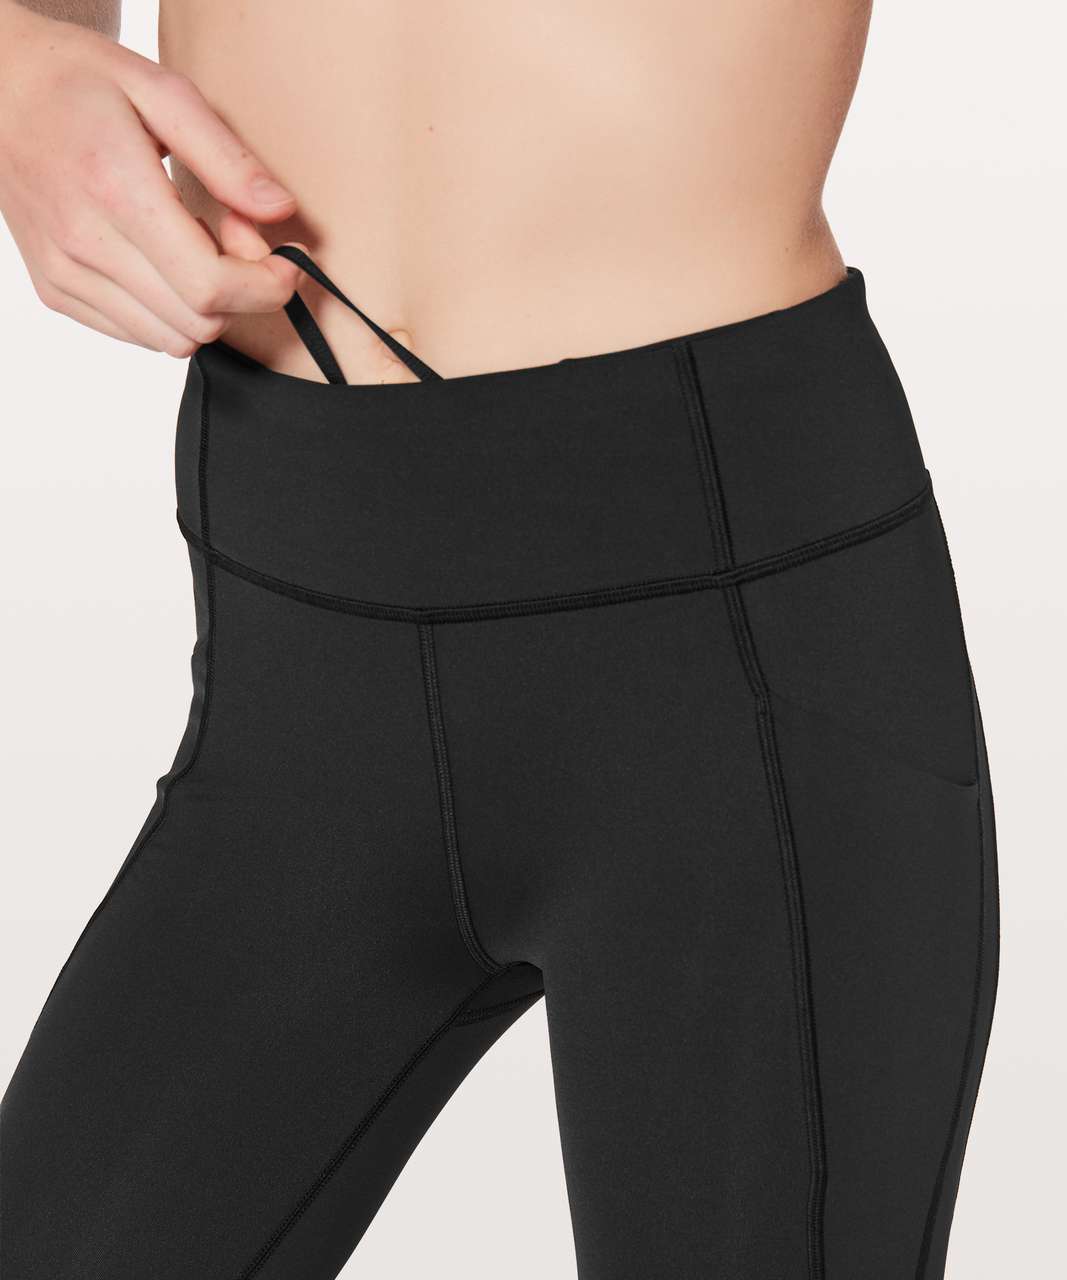 Lululemon Time To Sweat Crop Leggings with Side Pockets, Black size 8